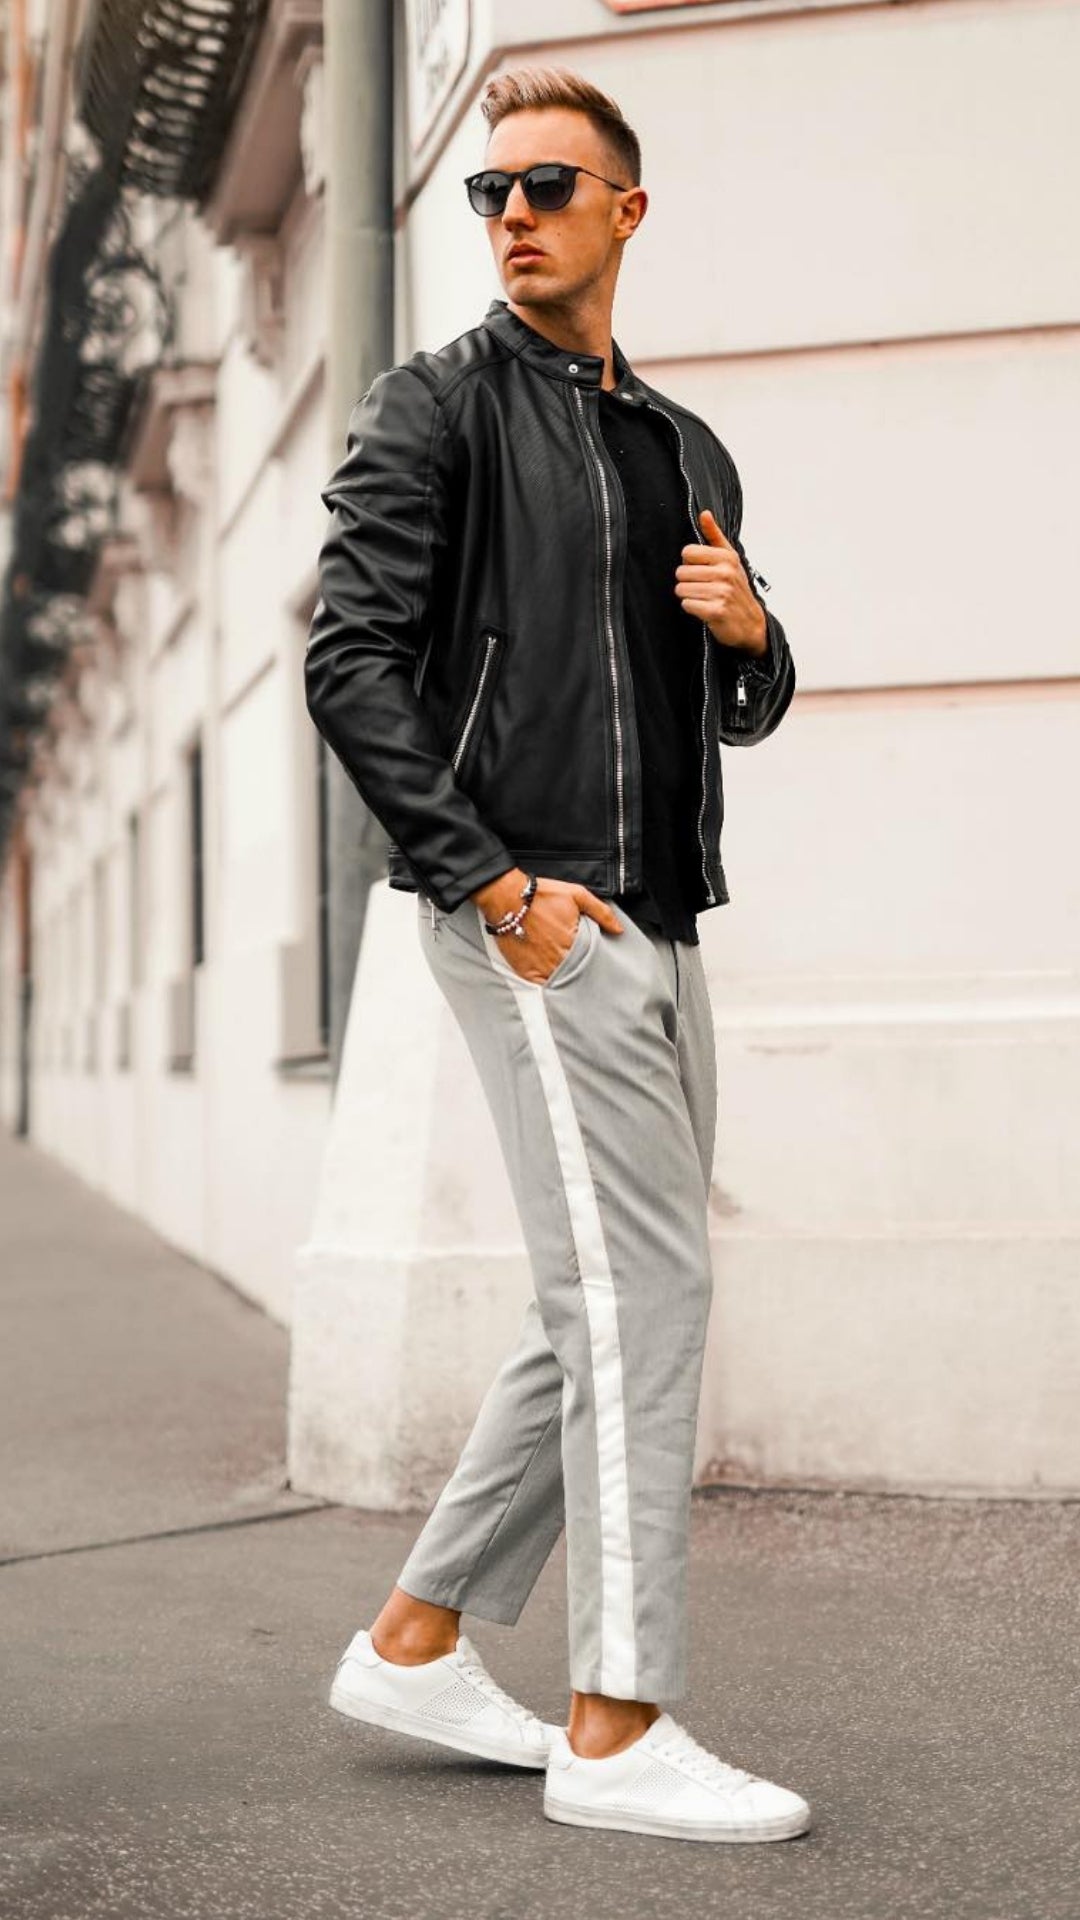 5 Coolest leather jacket outfits for men. #leather #jacket #outfits #streetstyle #mensfashion